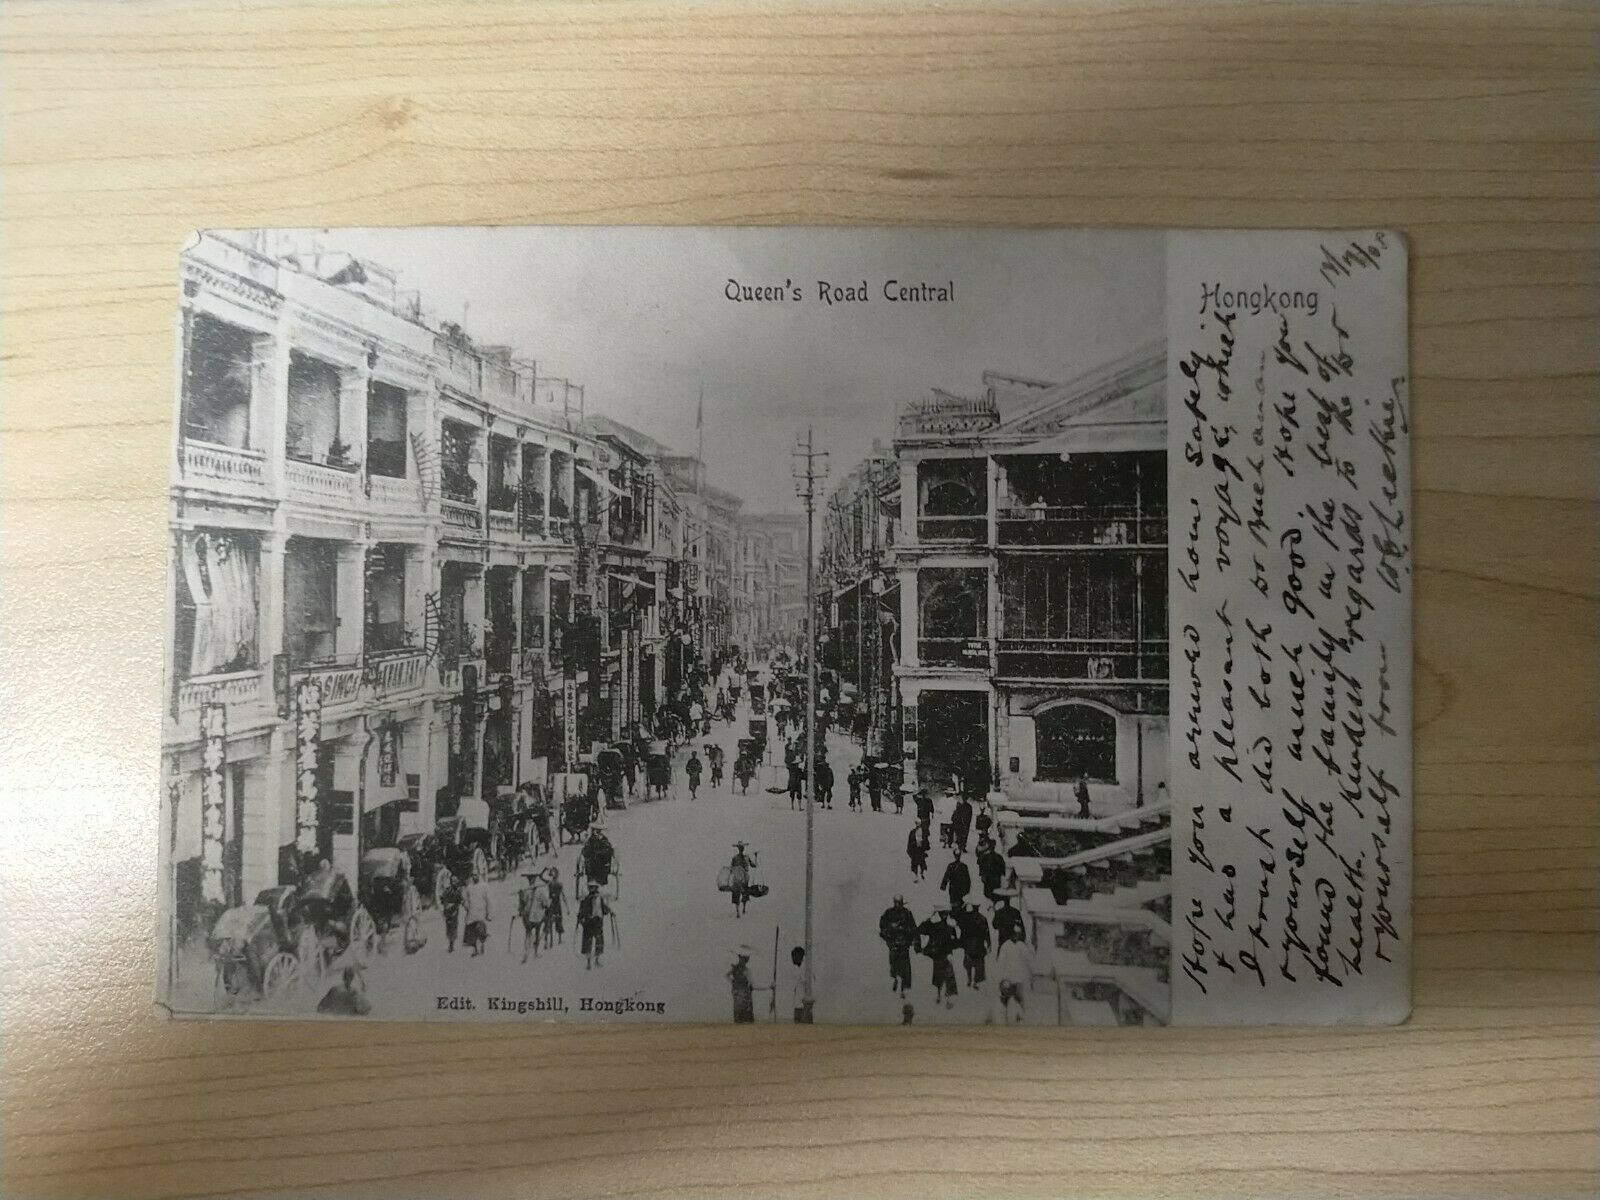 Hong Kong China 1901 Postcard, Queen's Road Central Hong Kong, posted in Victoria HK but stamp removed